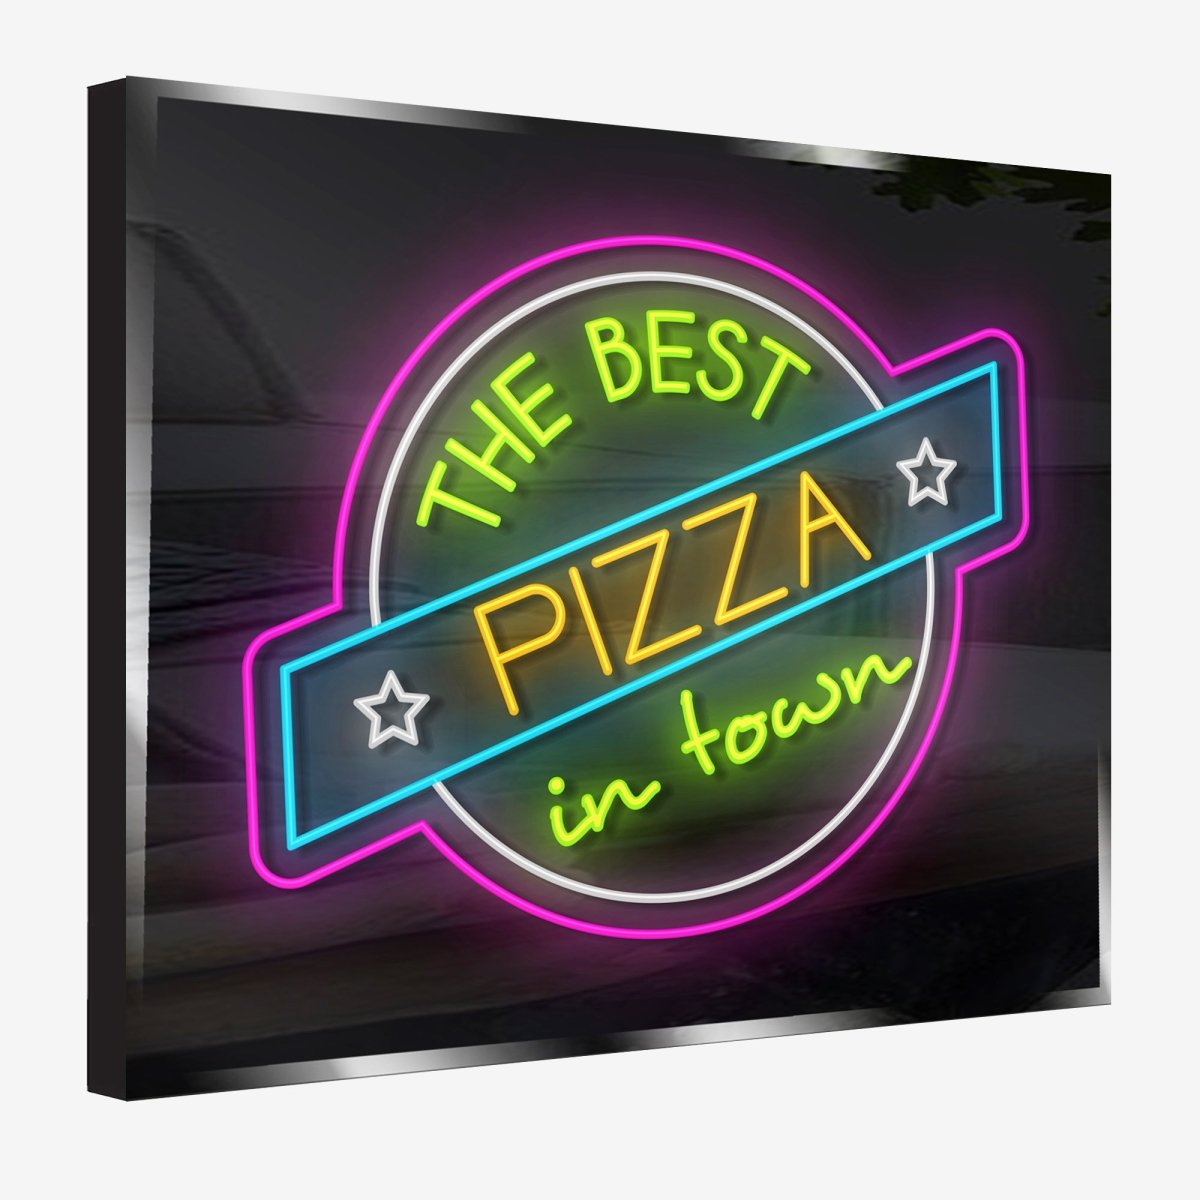 Personalized Neon Sign Pizza2 - madaboutneon